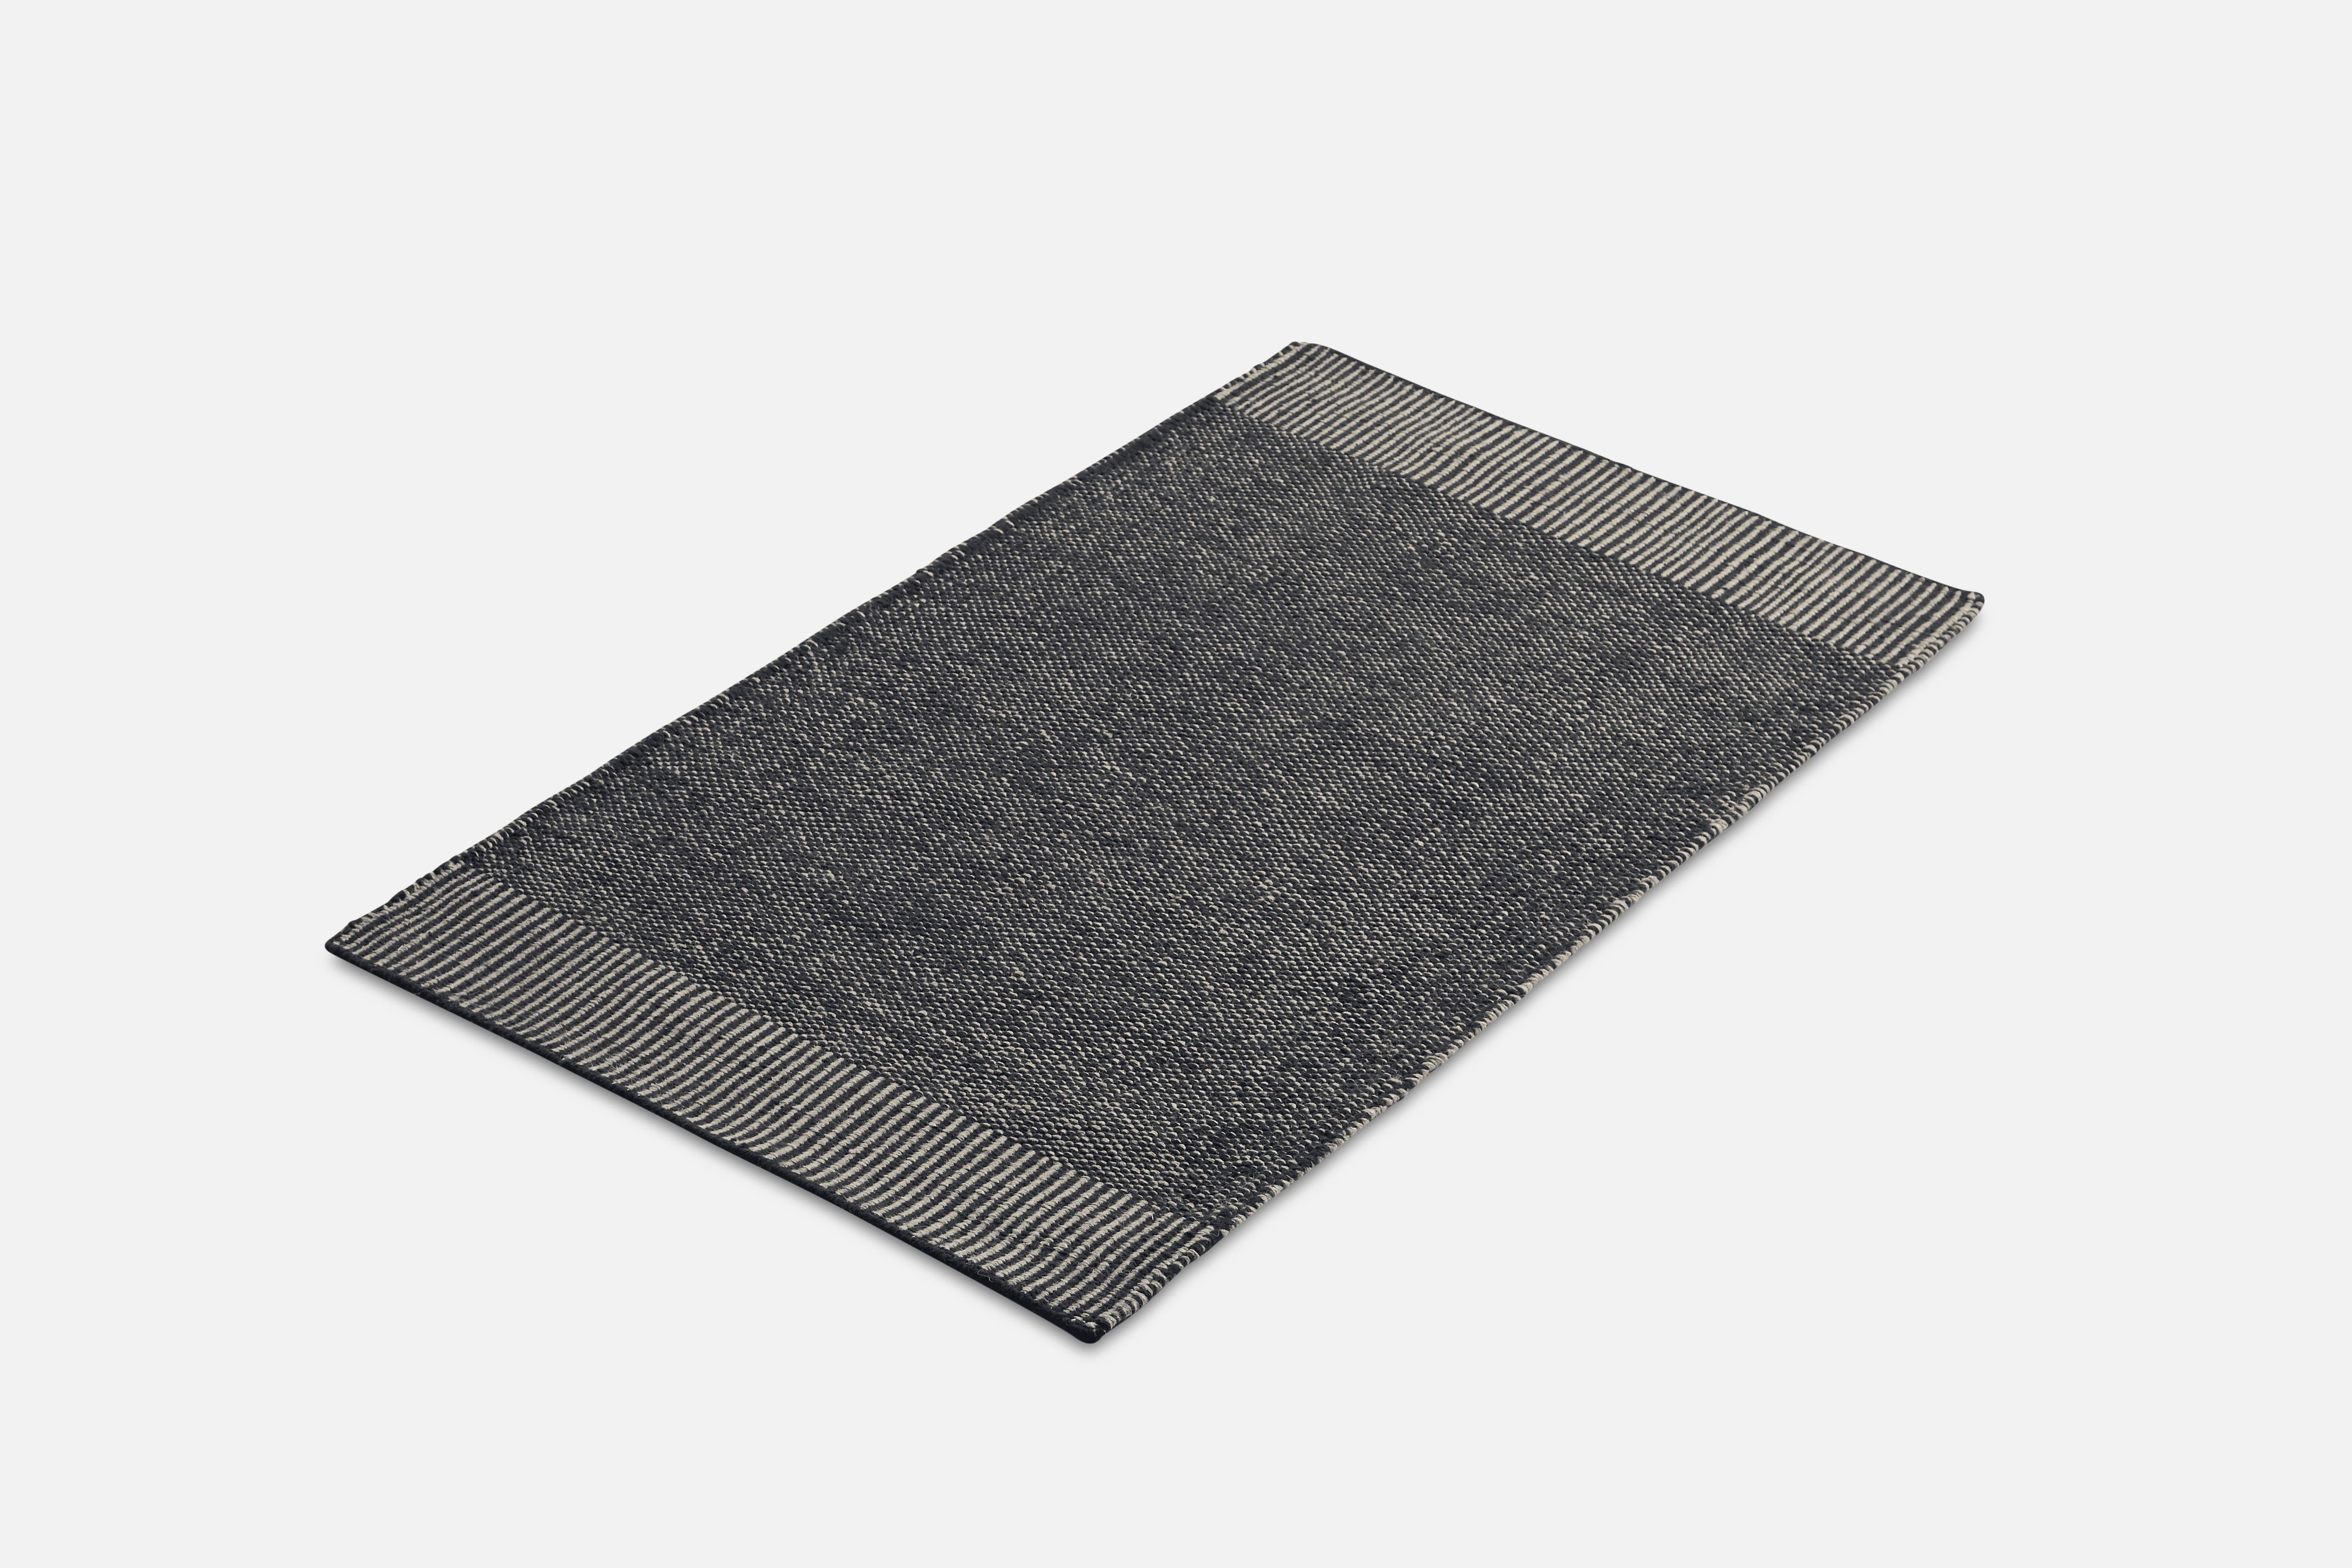 Small Grey Rombo rug by Studio MLR.
Materials: 65% wool, 35% jute.
Dimensions: W 90 x L 140 cm
Available in 3 sizes: W 90 x L 140, W 170 x L 240, W 75 x L 200 cm.
Available in grey, moss green and rust.

Rombo is characterised by the materials